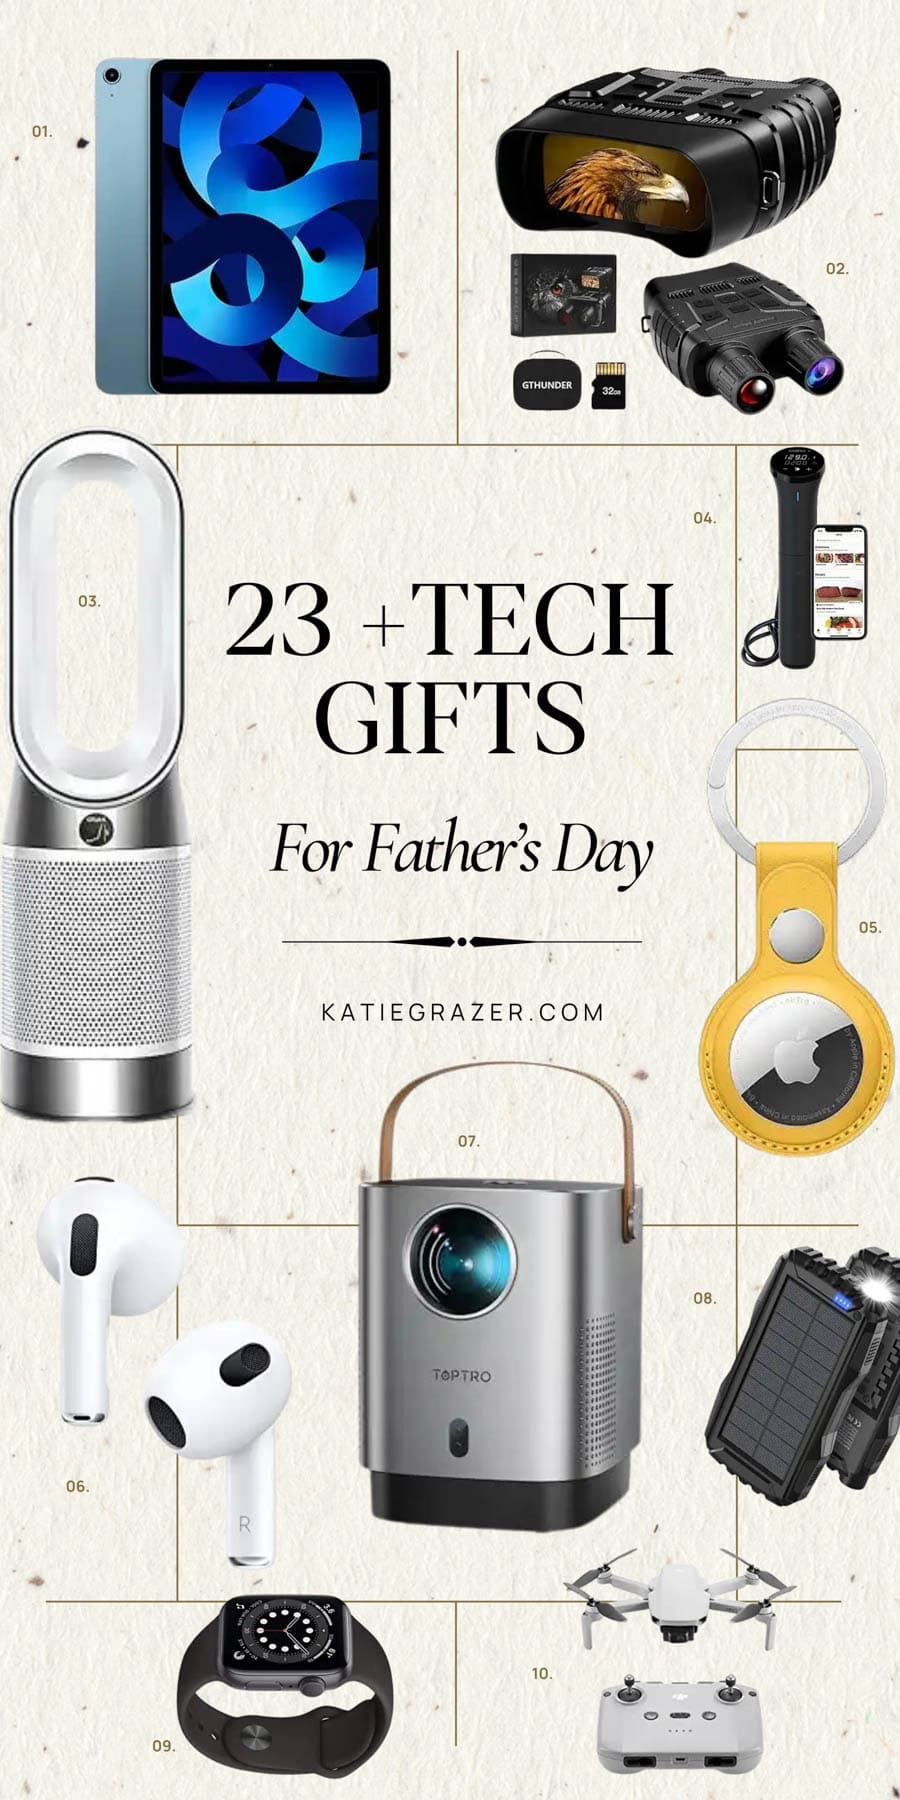 TECH GIFT IDEAS FATHERS DAY